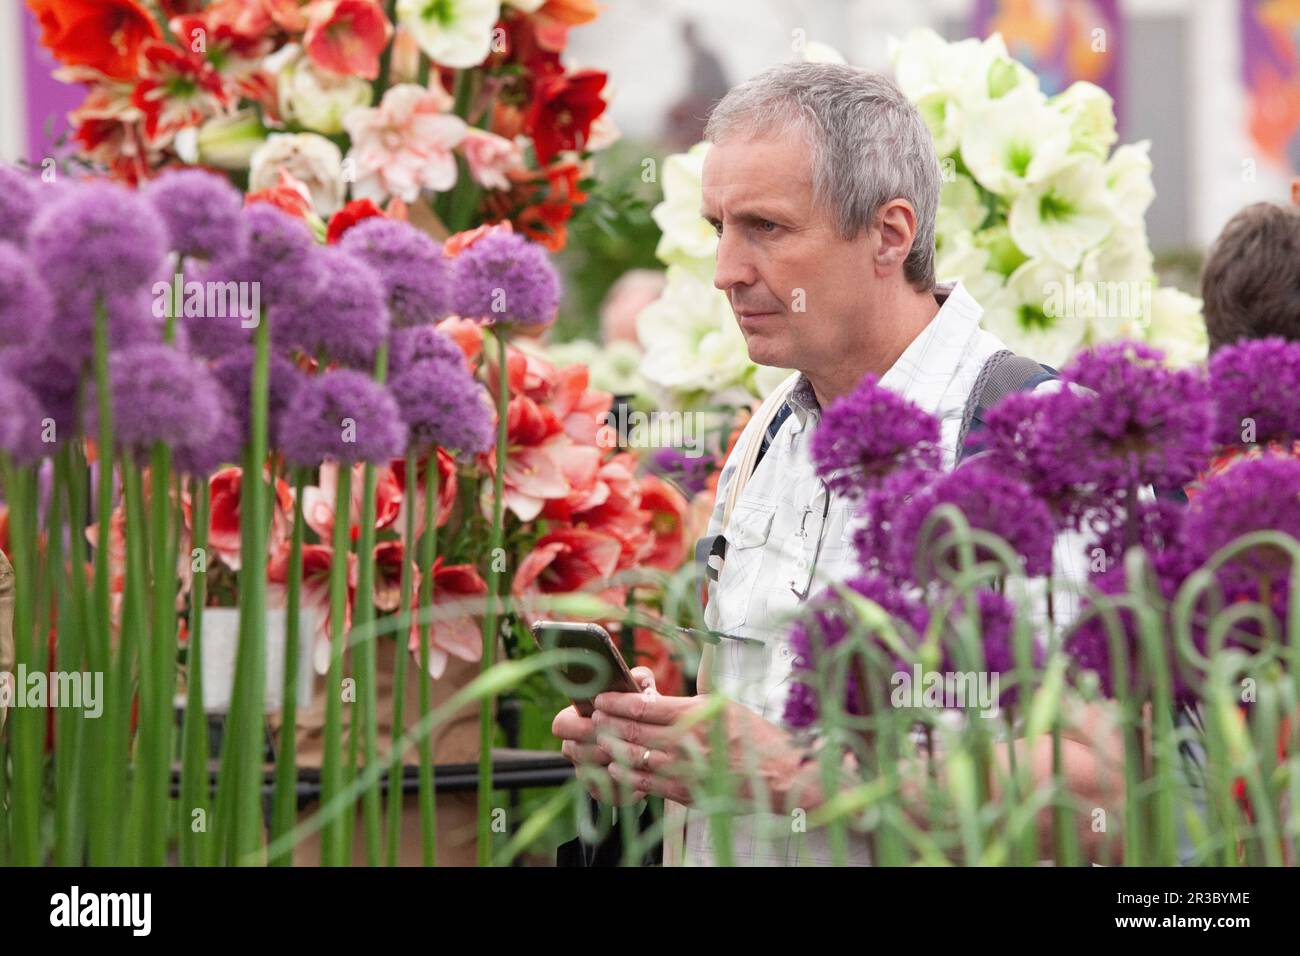 London, UK. 23rd May, 2023. The RHS Chelsea Flower Show opens to the public, with a sea of straw hats and floral dresses surrounding each of the show gardens. In the Grand Pavillion specialist plant growers draw crowds and sell bulbs, plants and seeds. Credit: Anna Watson/Alamy Live News Stock Photo